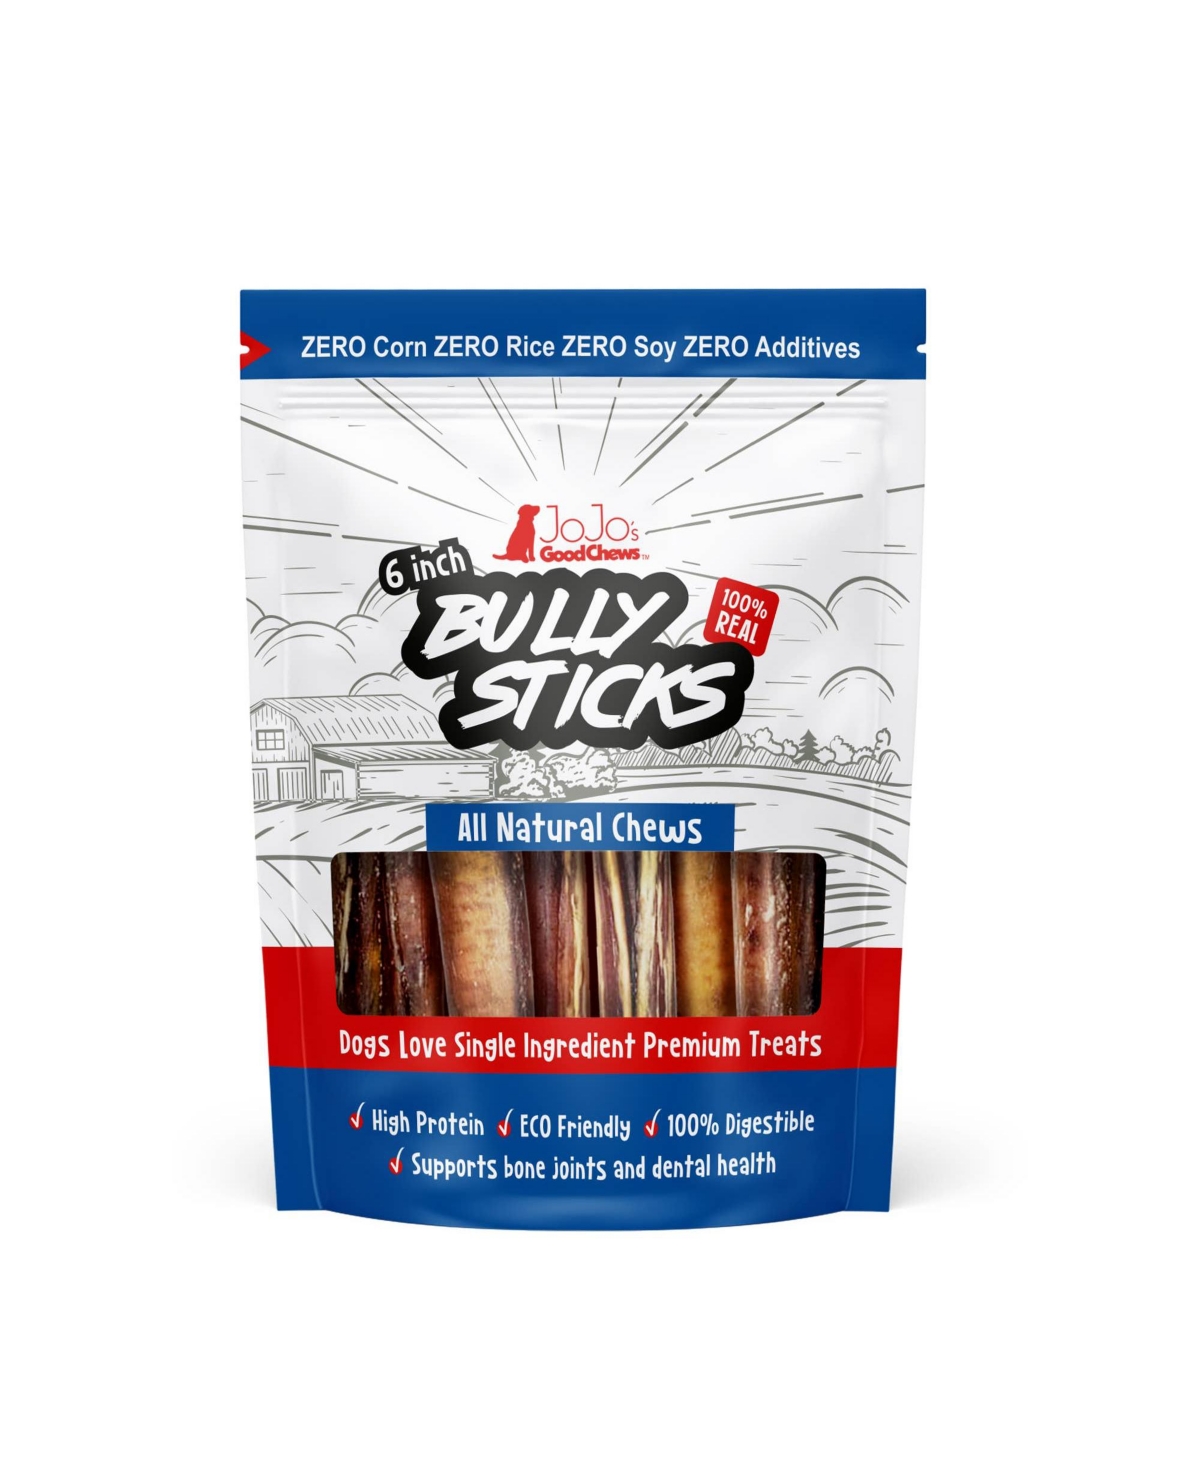 All-Natural Beef Bully Stick Dog Treats - 6" Thick (3-Pack) - Open Miscellaneous